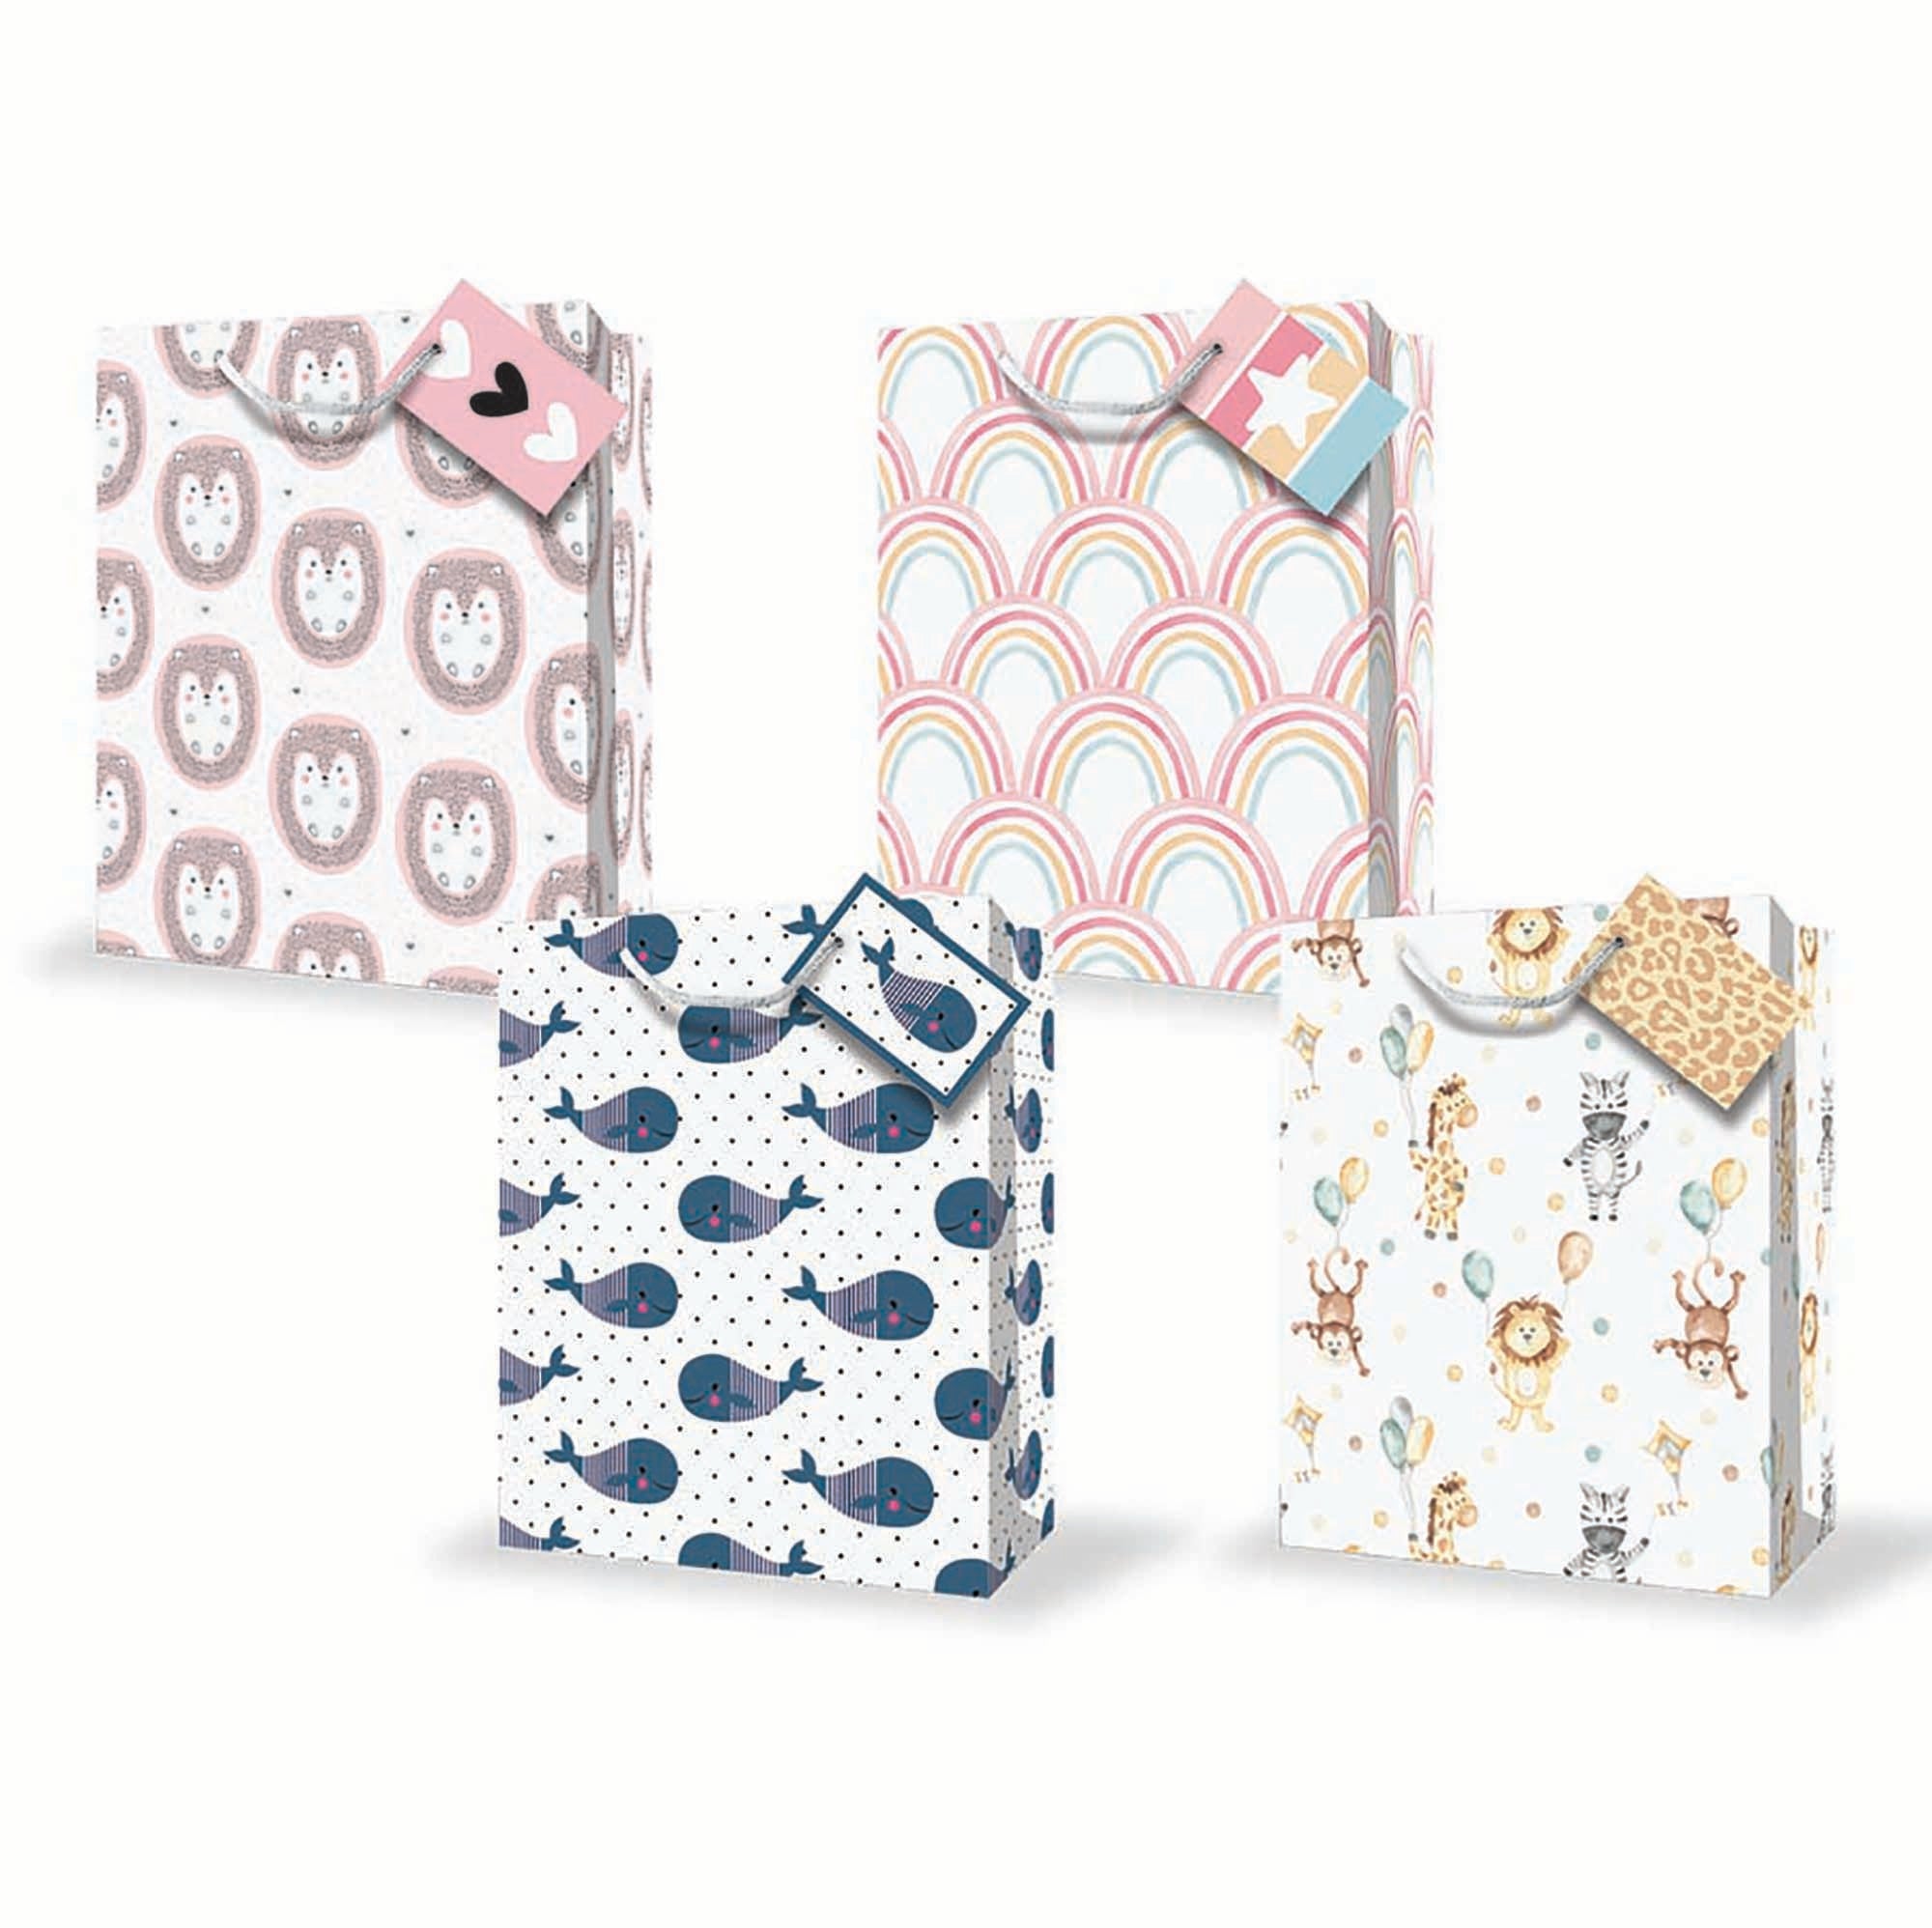 Mill Brook Gift Bag - Baby Large 10.5x12.75x5.5in